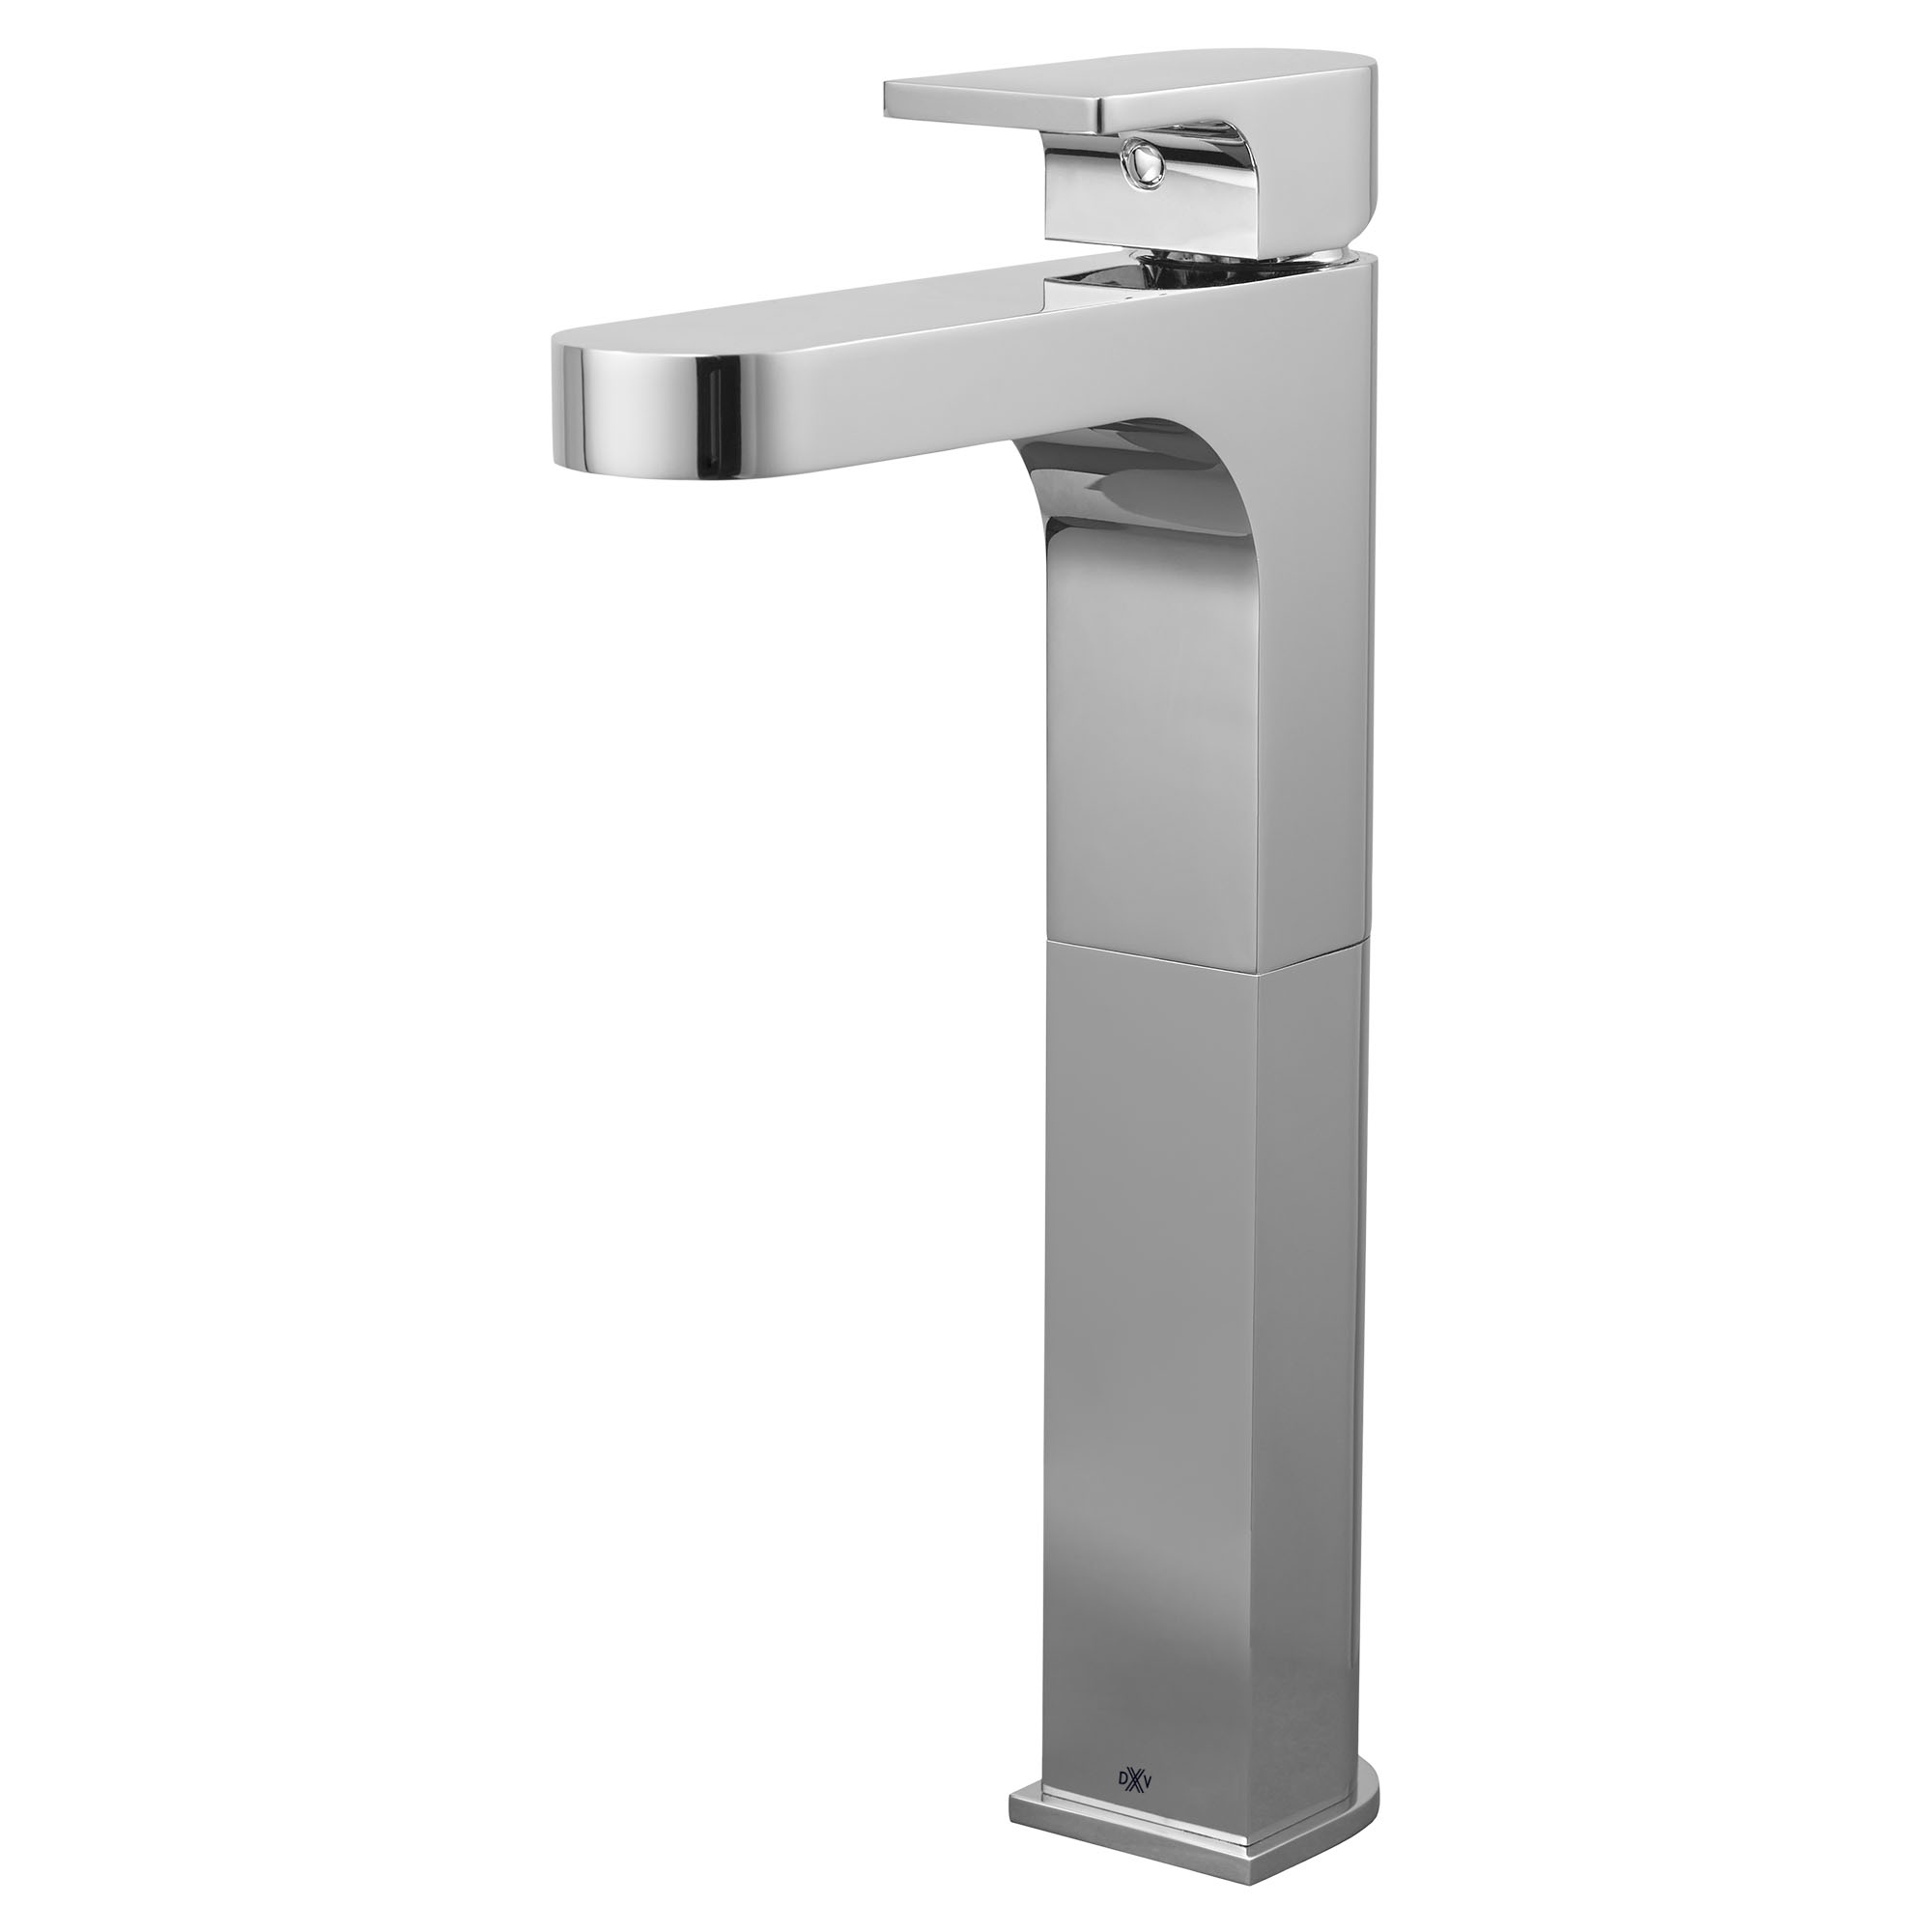 Equility Single Handle Vessel Bathroom Faucet with Lever Handle